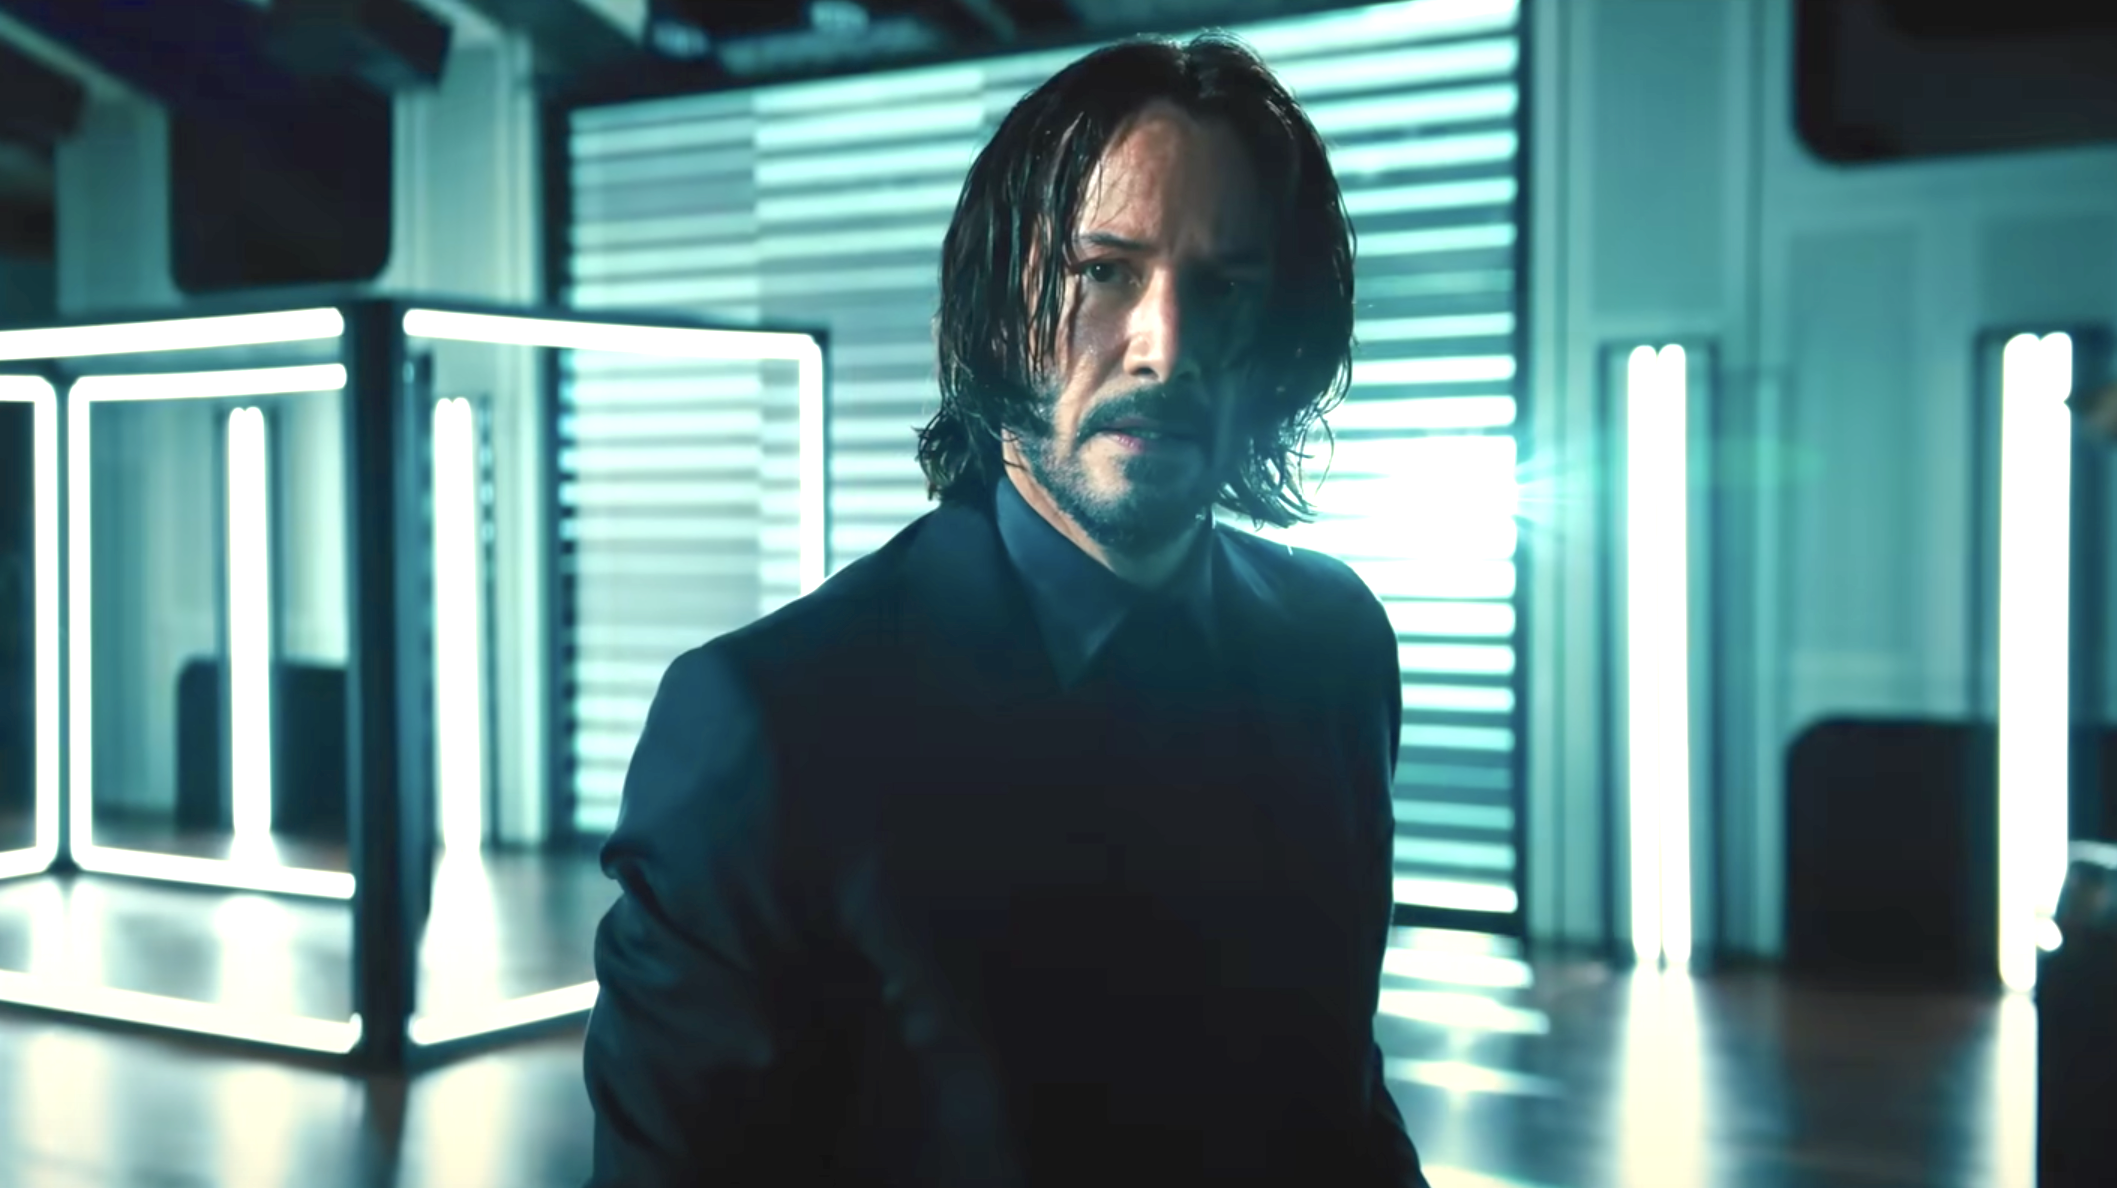 John Wick 4 Release Date, Cast & Everything We Know